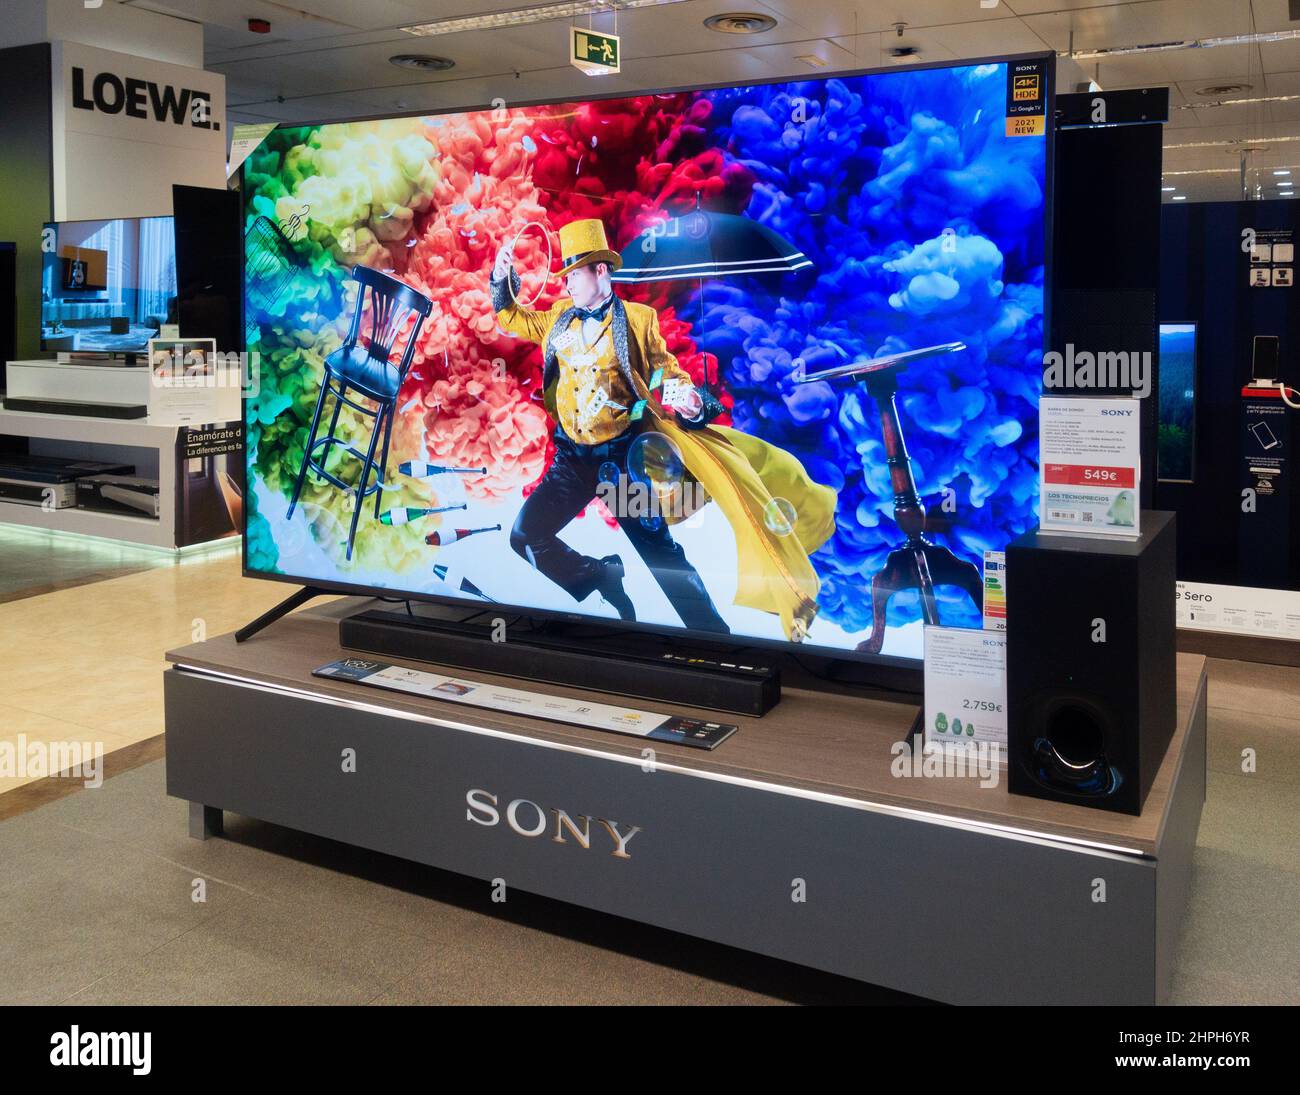 Sony television, flat screen, high definition Stock Photo